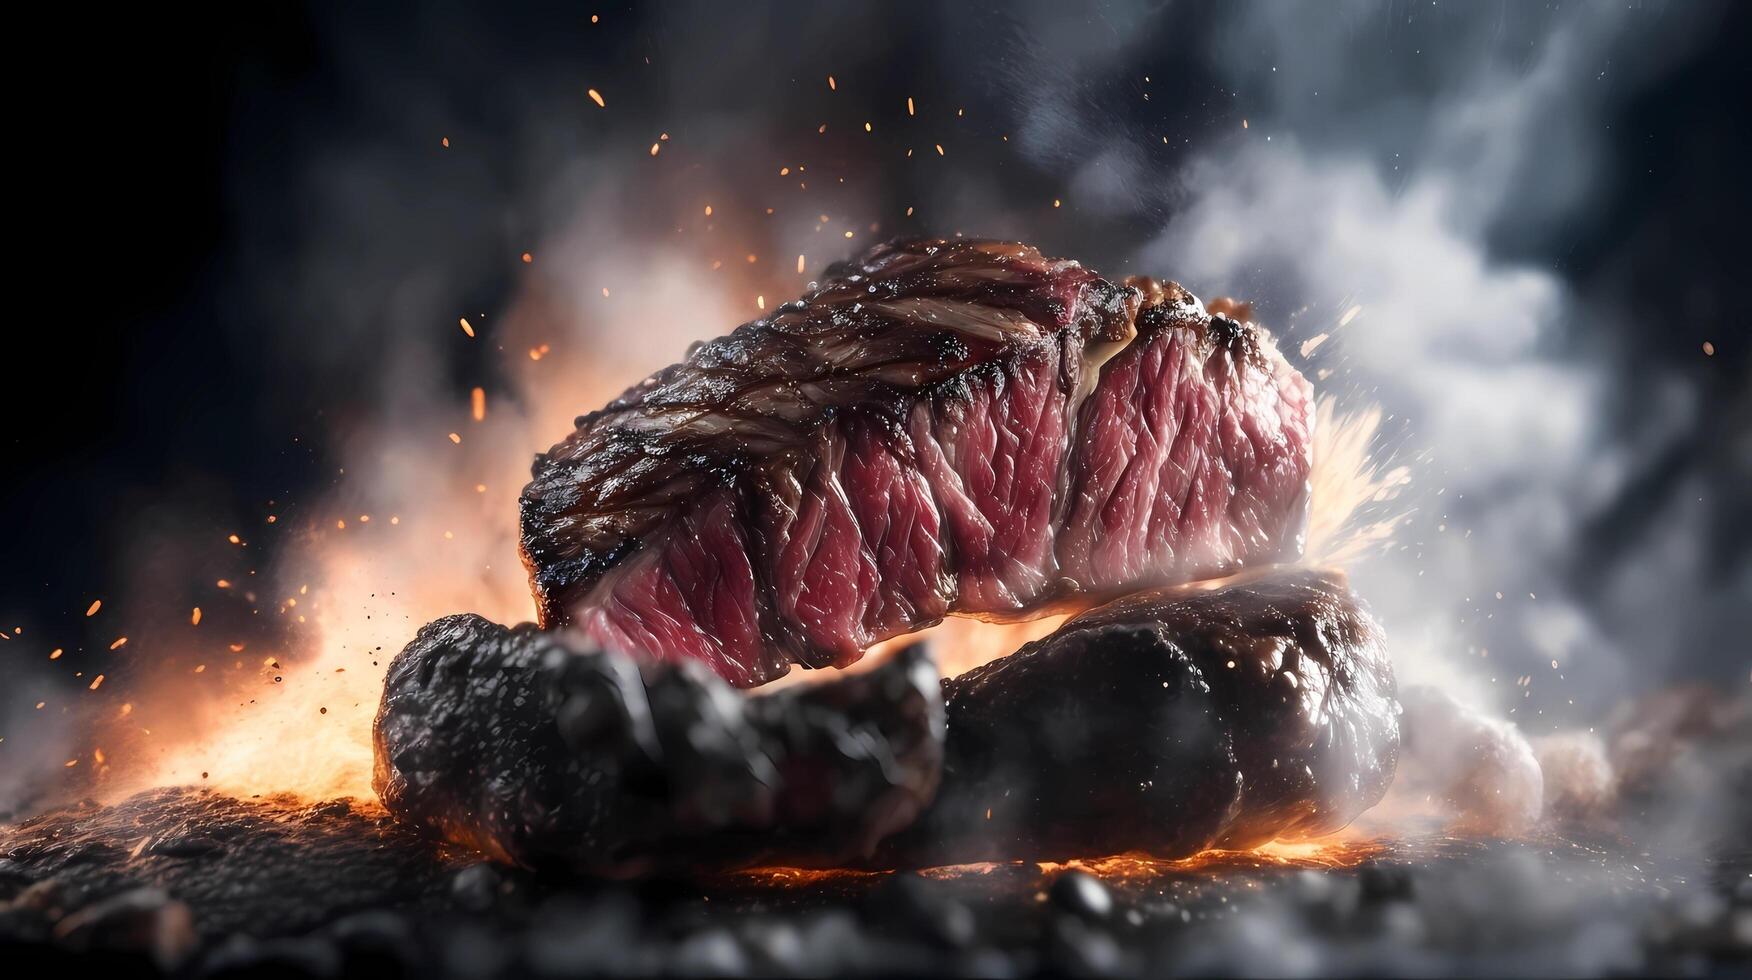 Steak on a plate with fire and smoke on a black background. art illustration photo